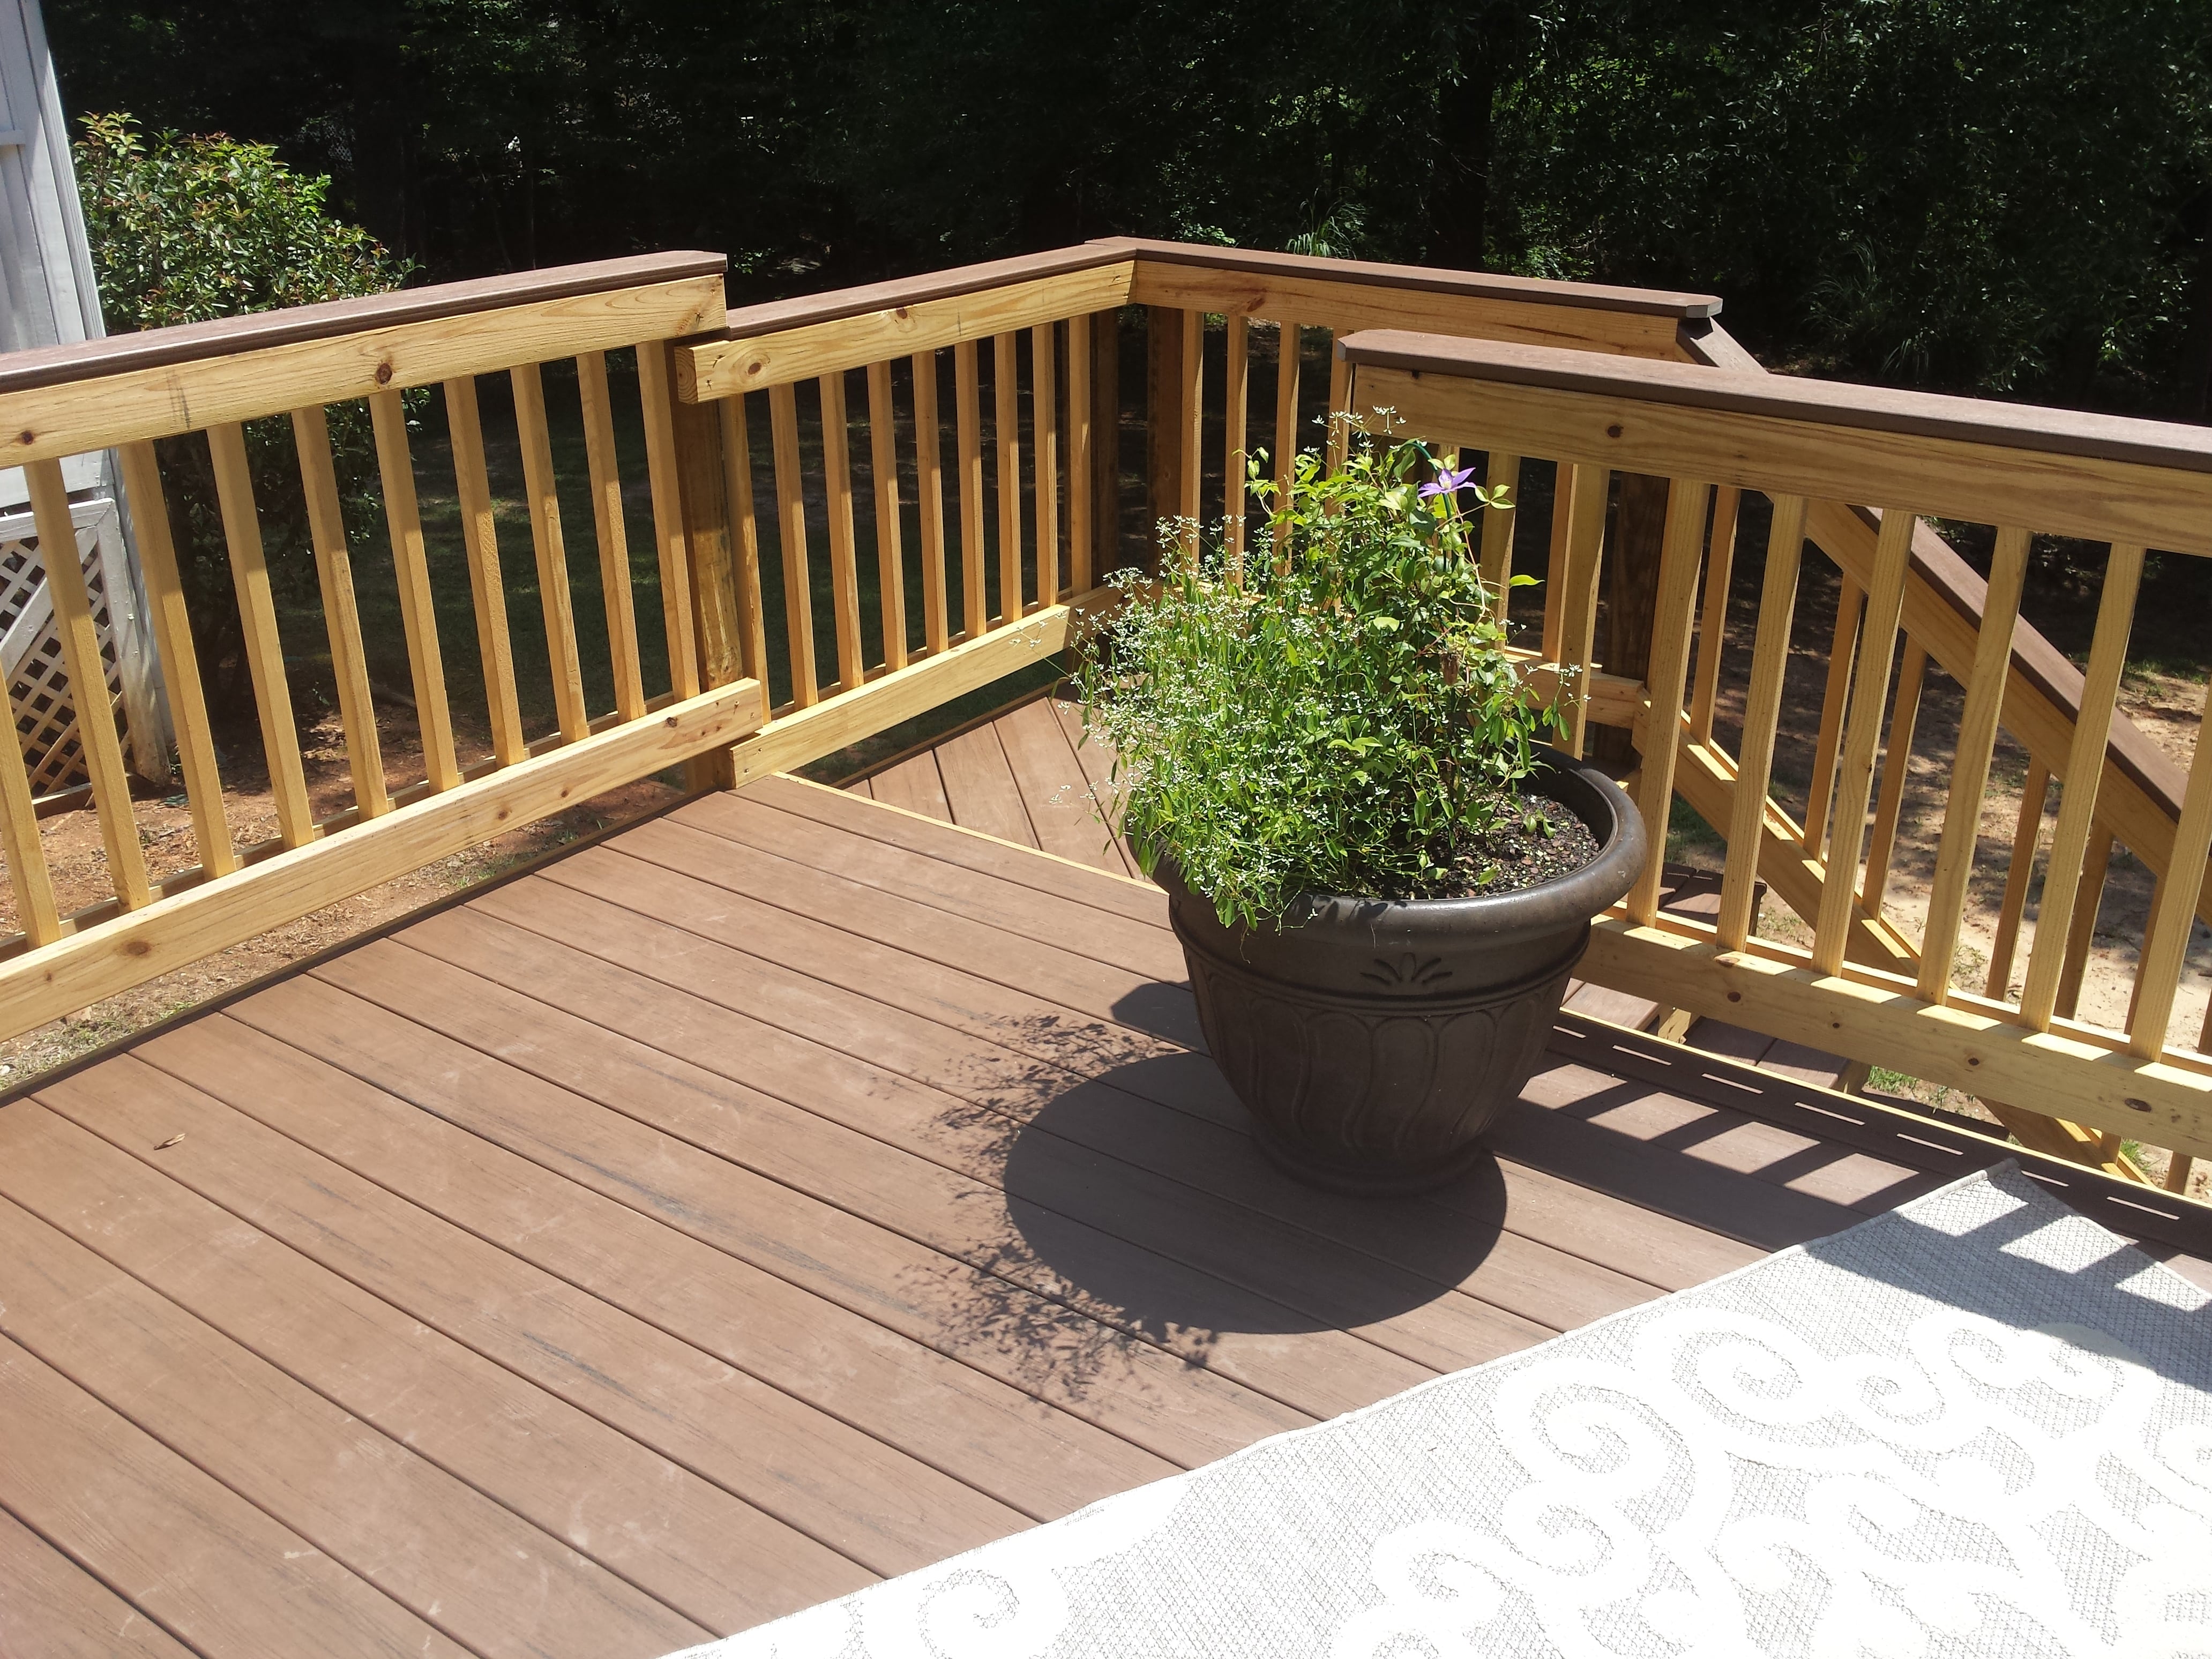 Wood deck with potted plant